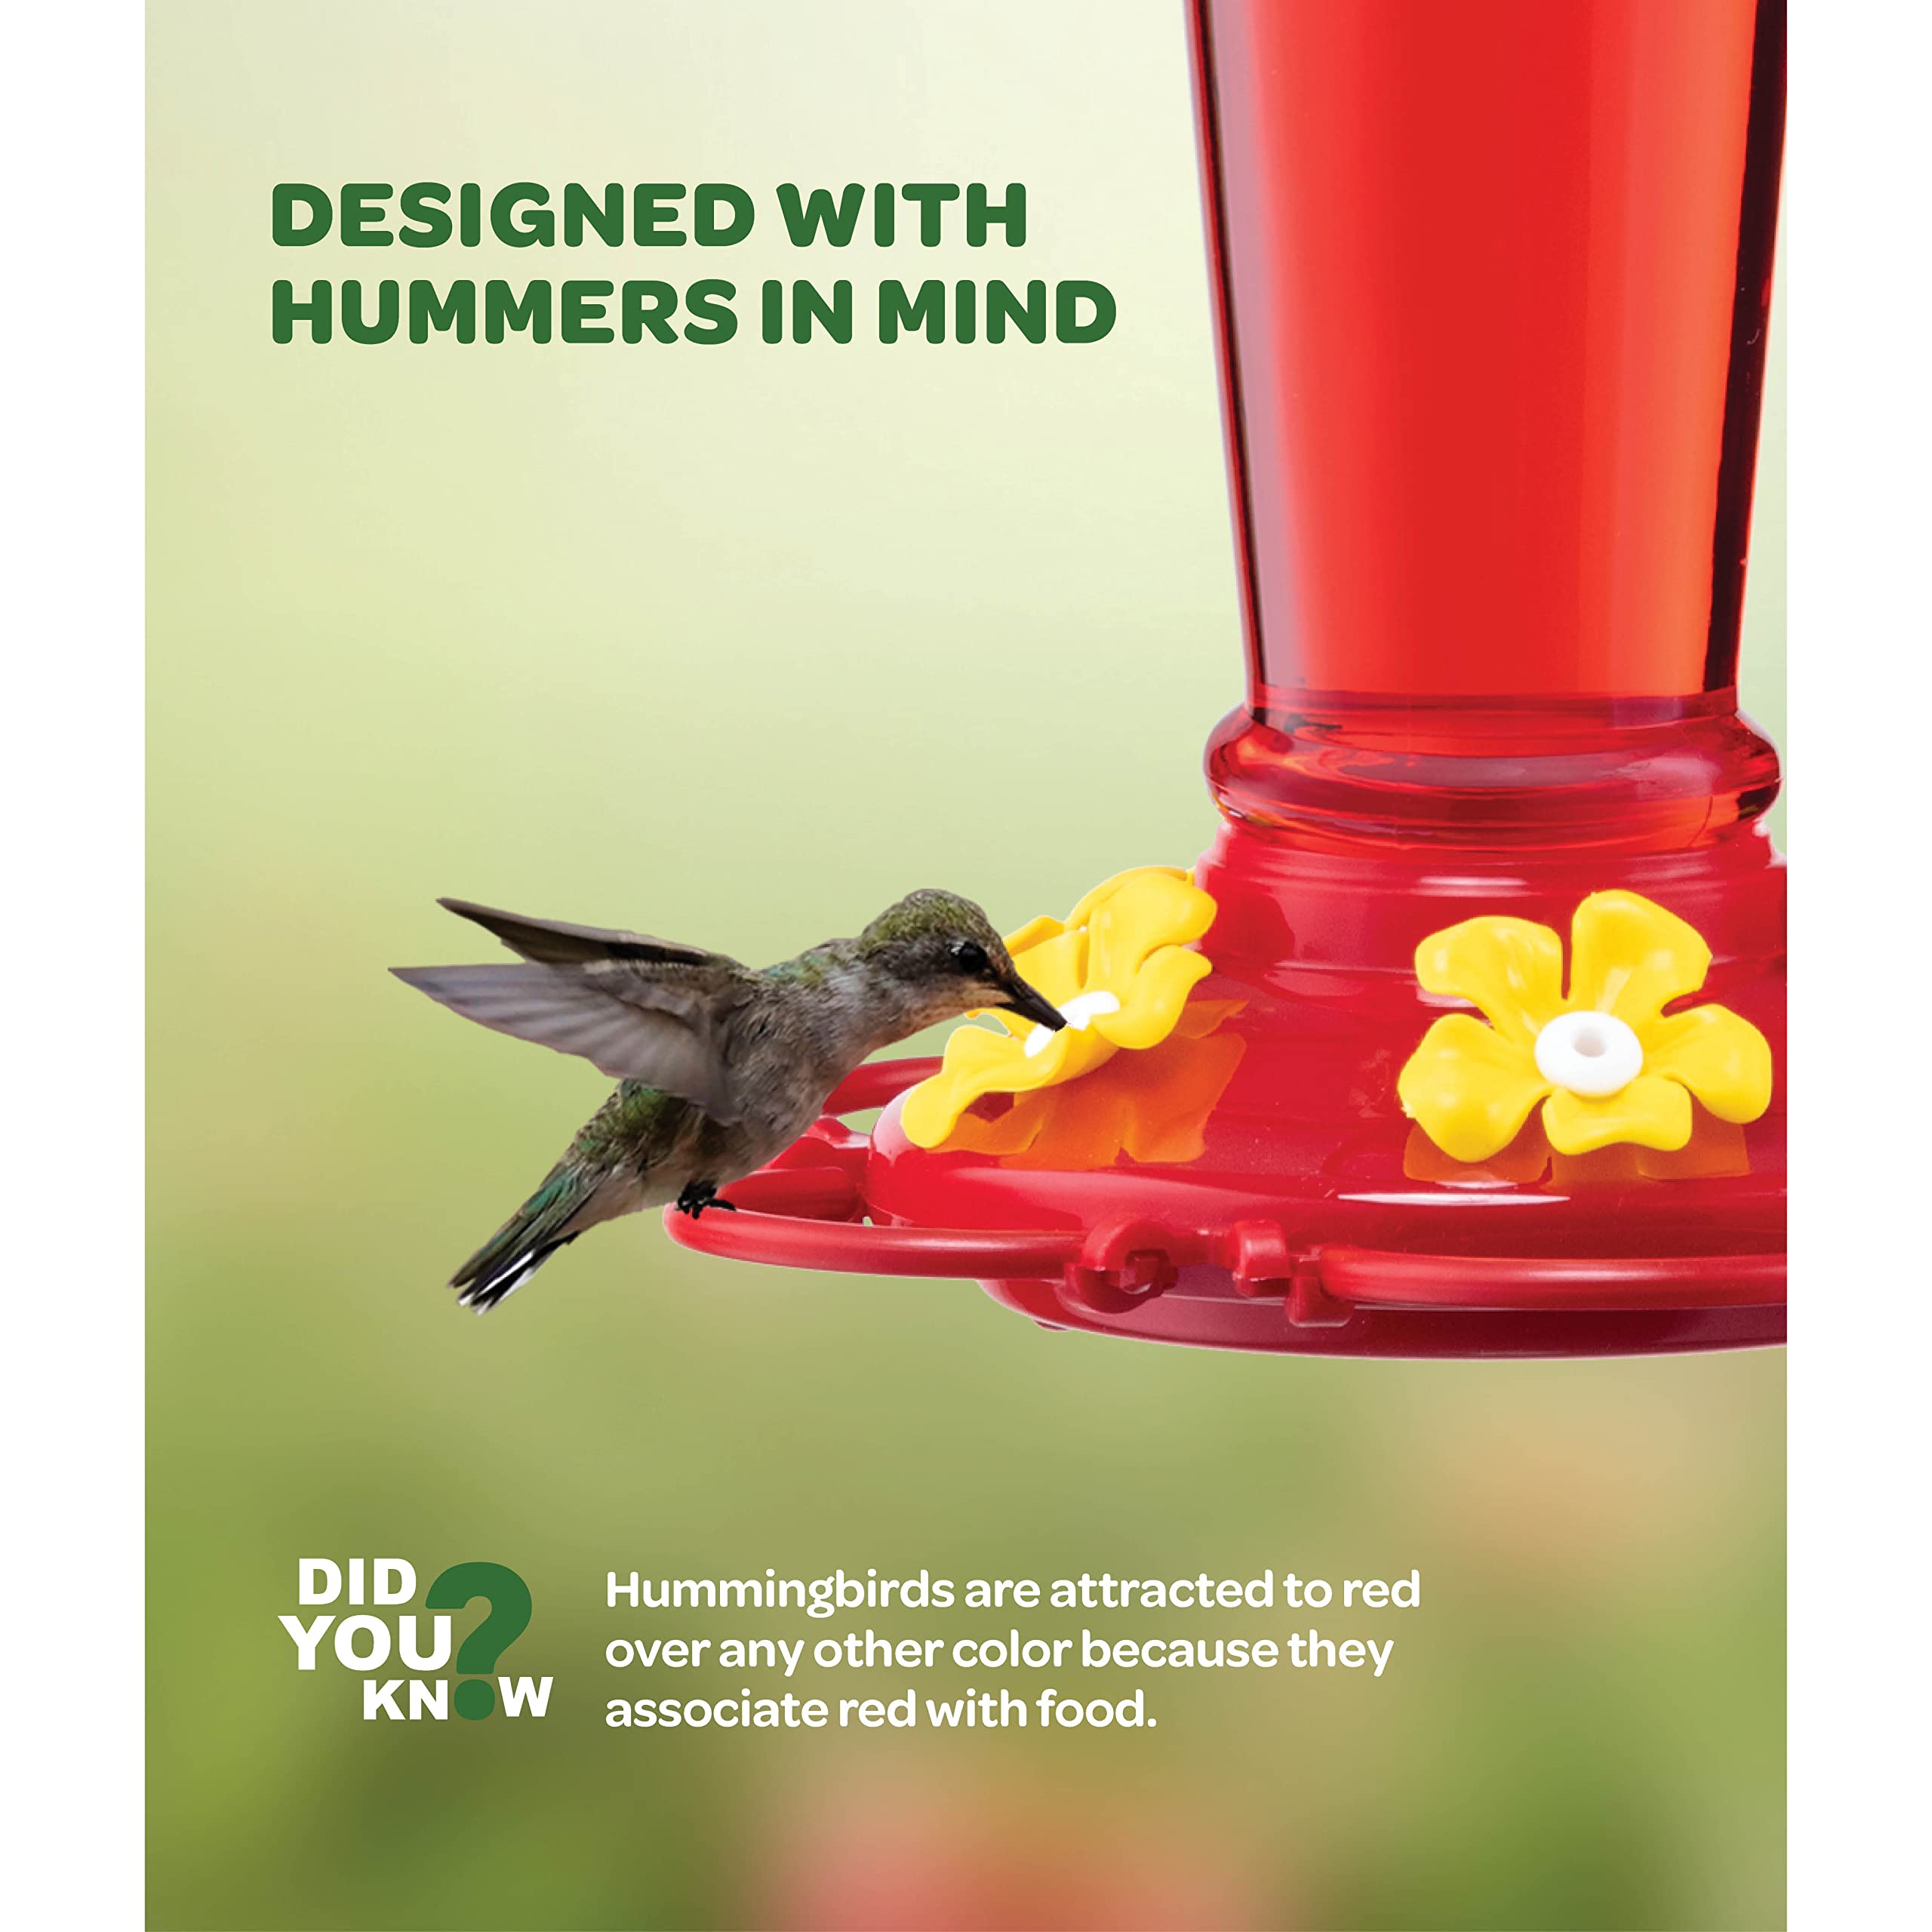 Hummingbird Feeder 10 oz [Set of 2] Glass Hummingbird Feeders for Outdoors, with Built-in Ant Guard - Circular Perch with 5 Feeding Ports - Wide Mouth for Easy Filling/2 Part Base for Easy Cleaning  - Like New